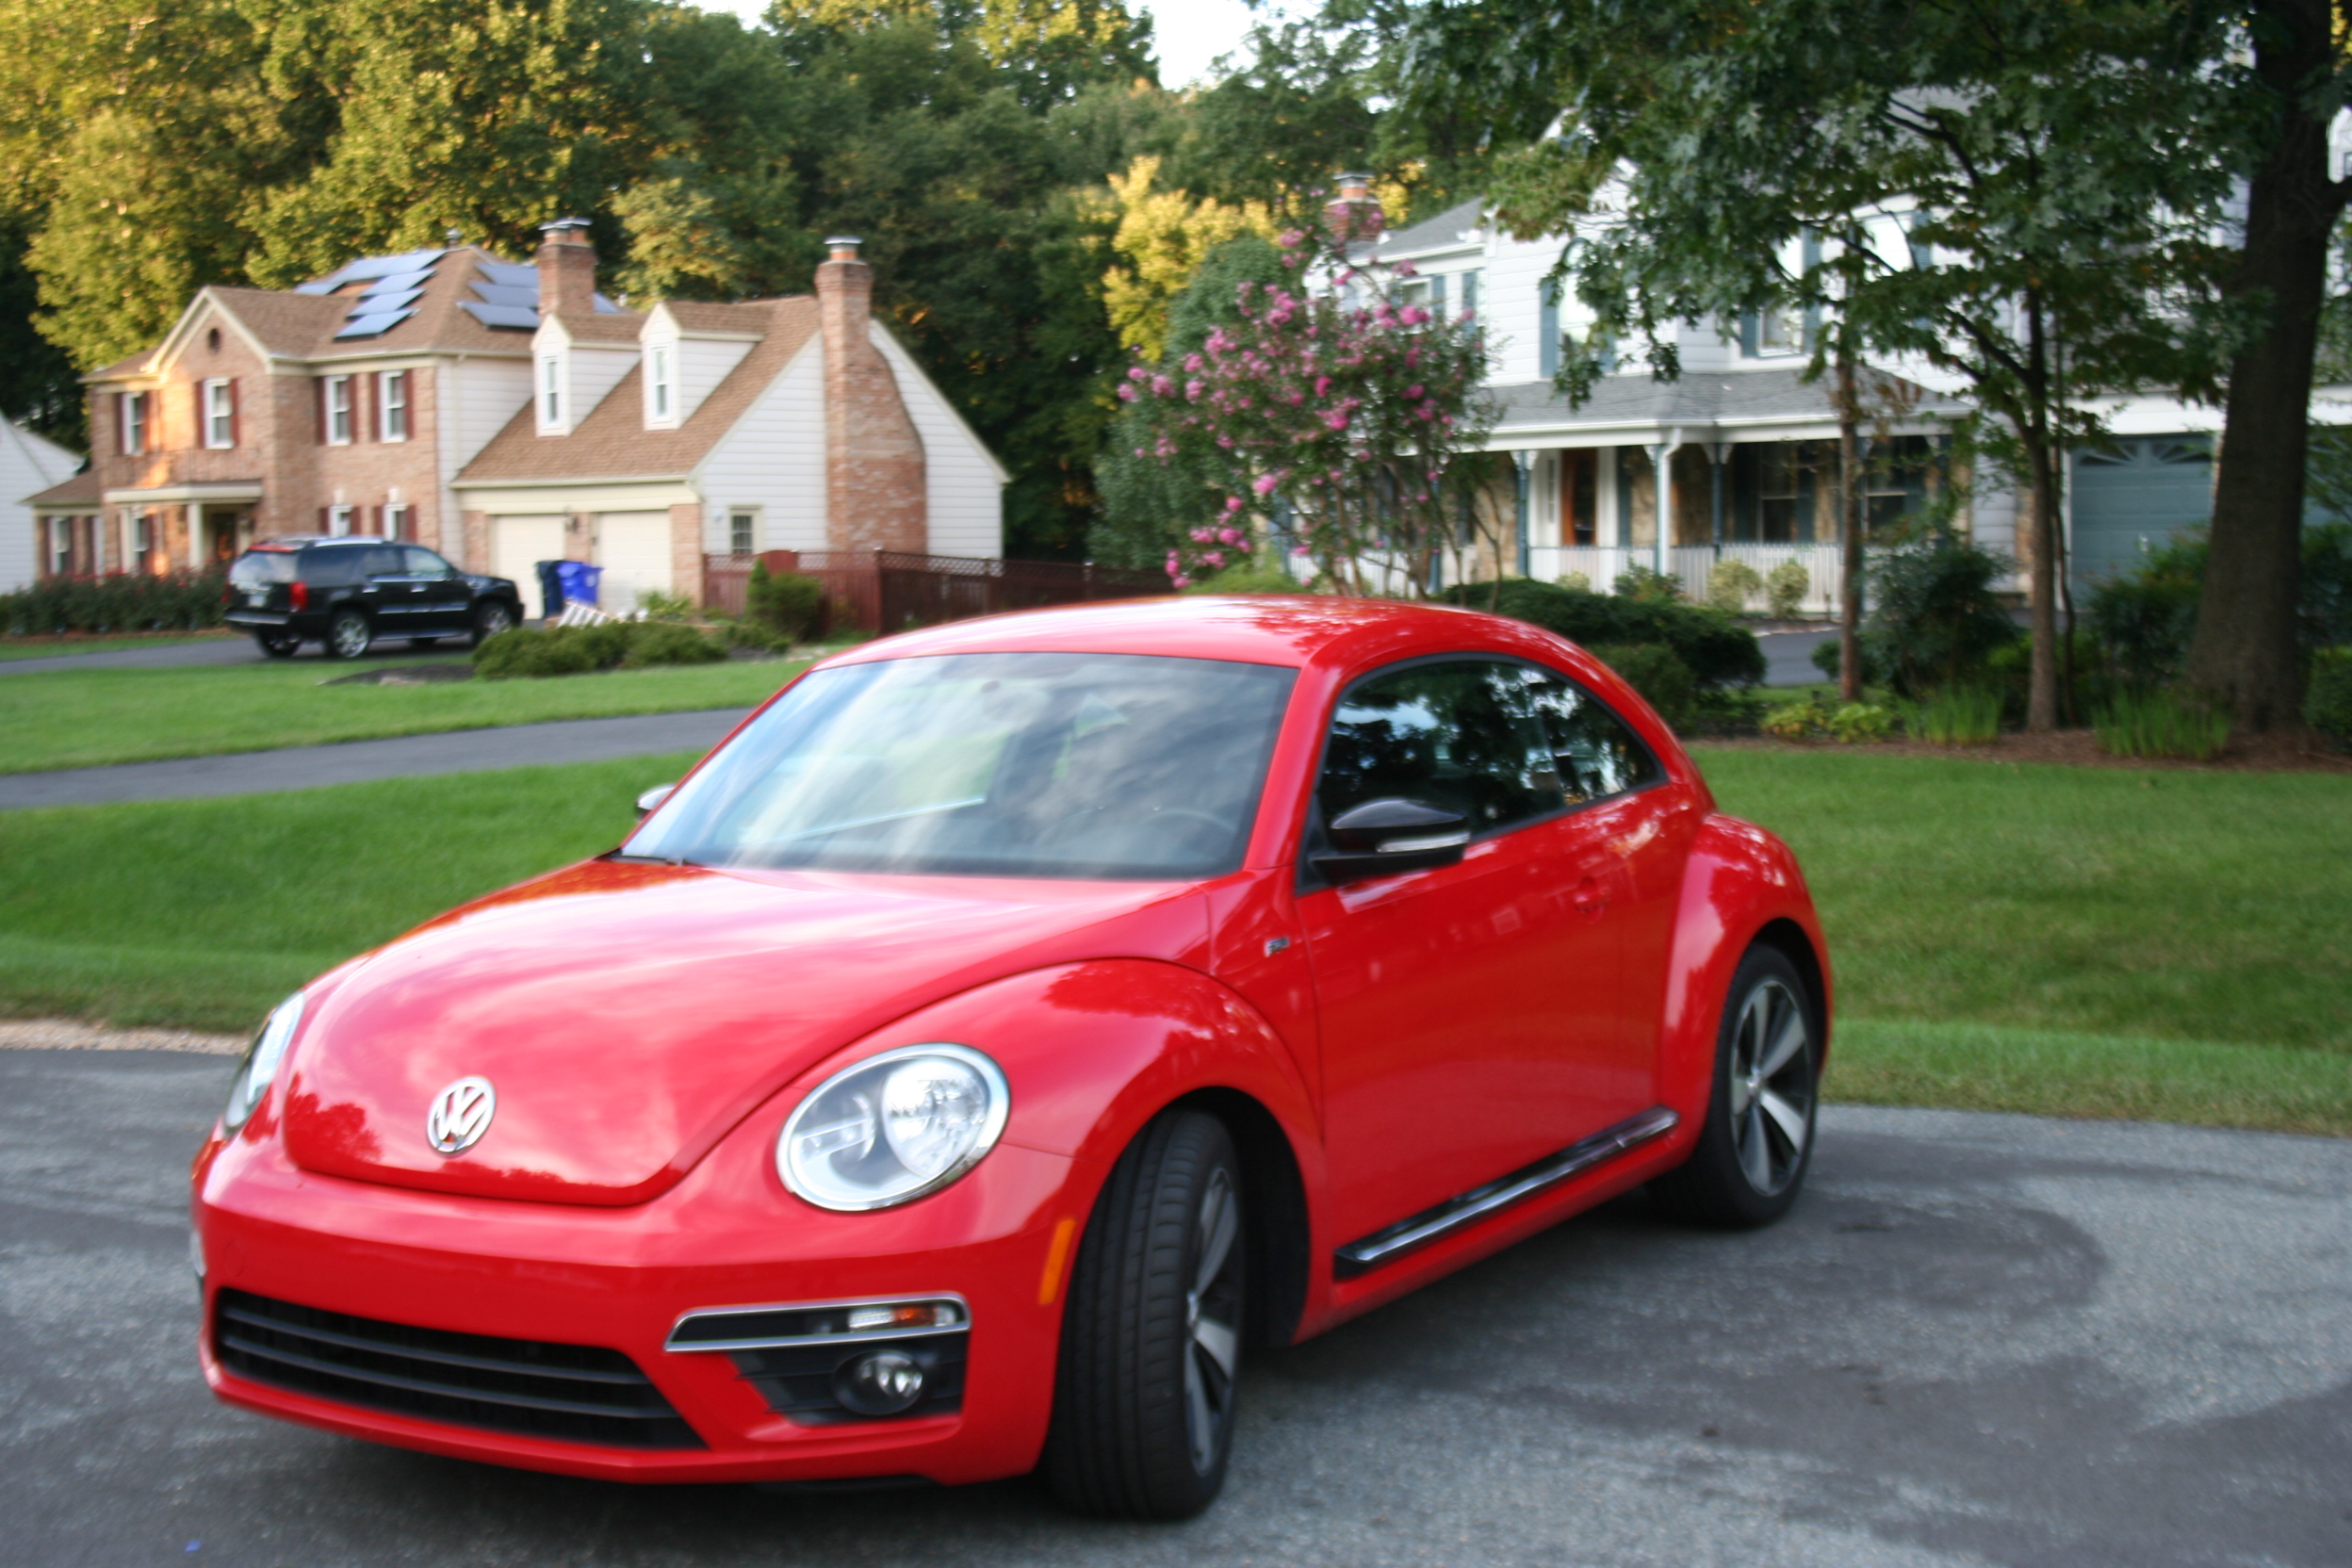 Car Report: 2014 Volkswagen Beetle R-Line: A modern coupe with throwback looks